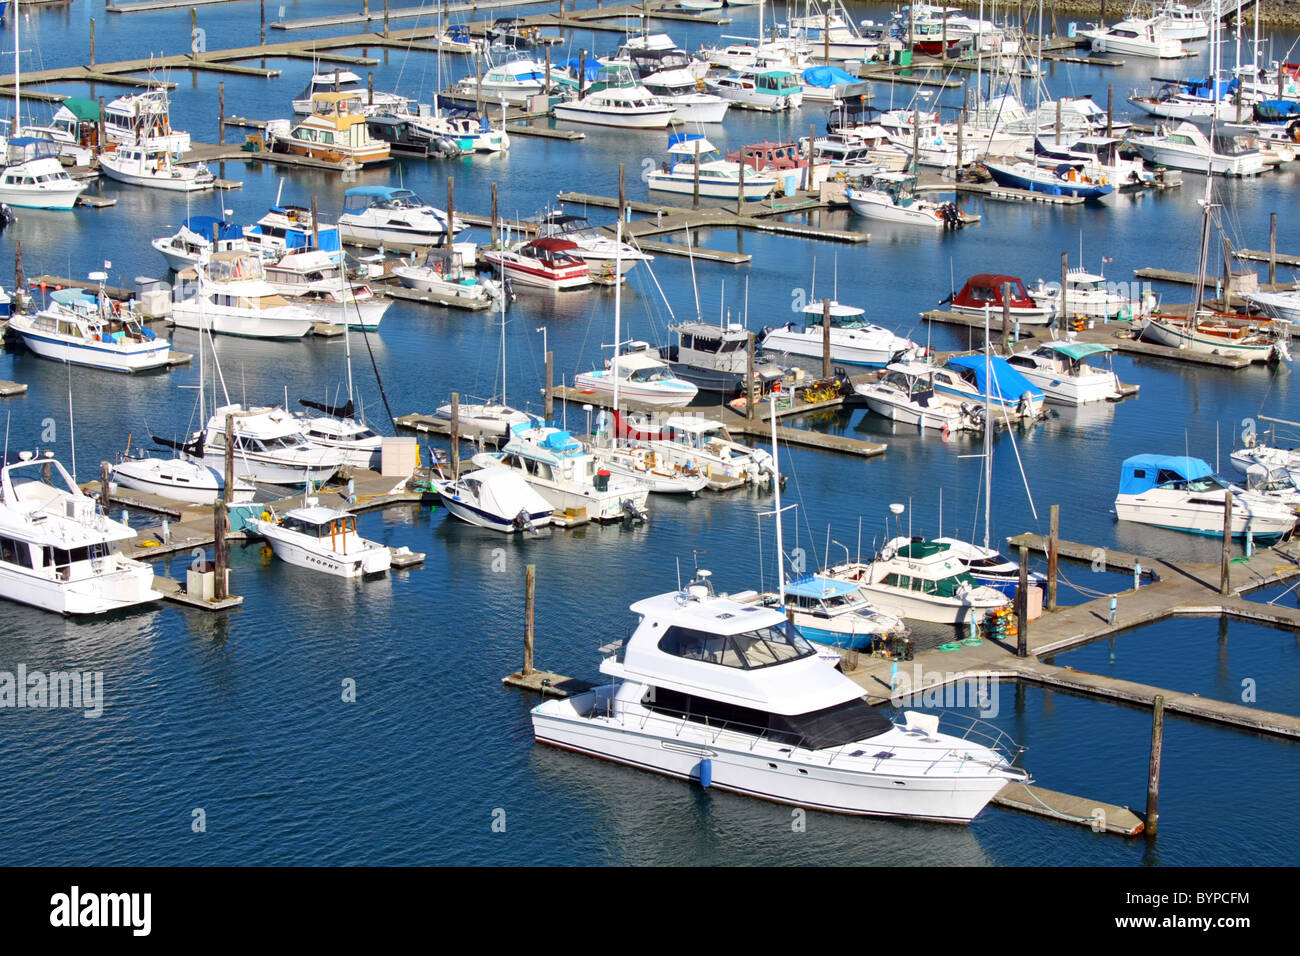 Pleasure boat marina and a wide variety of ocean going vessels in Newport, Oregon, USA, United States, North America. Stock Photo